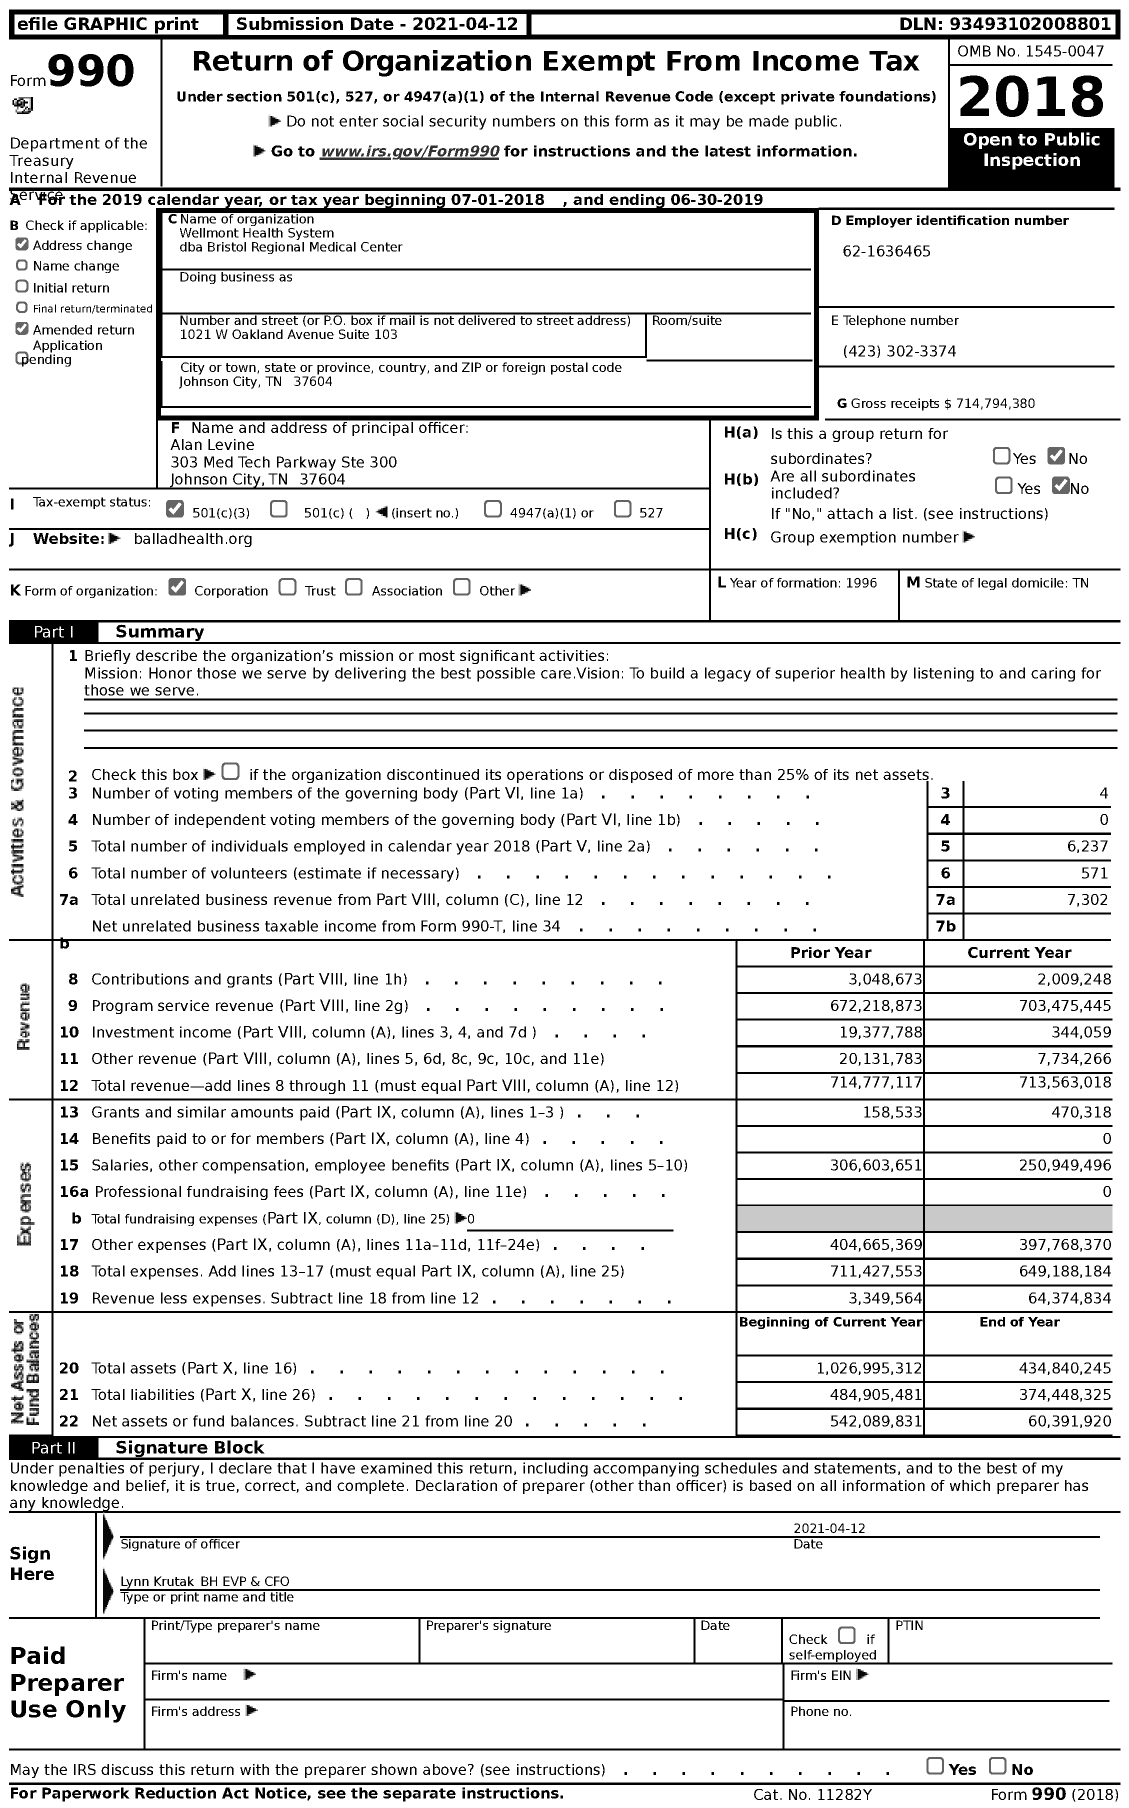 Image of first page of 2018 Form 990 for Wellmont Health System / Bristol Regional Medical Center